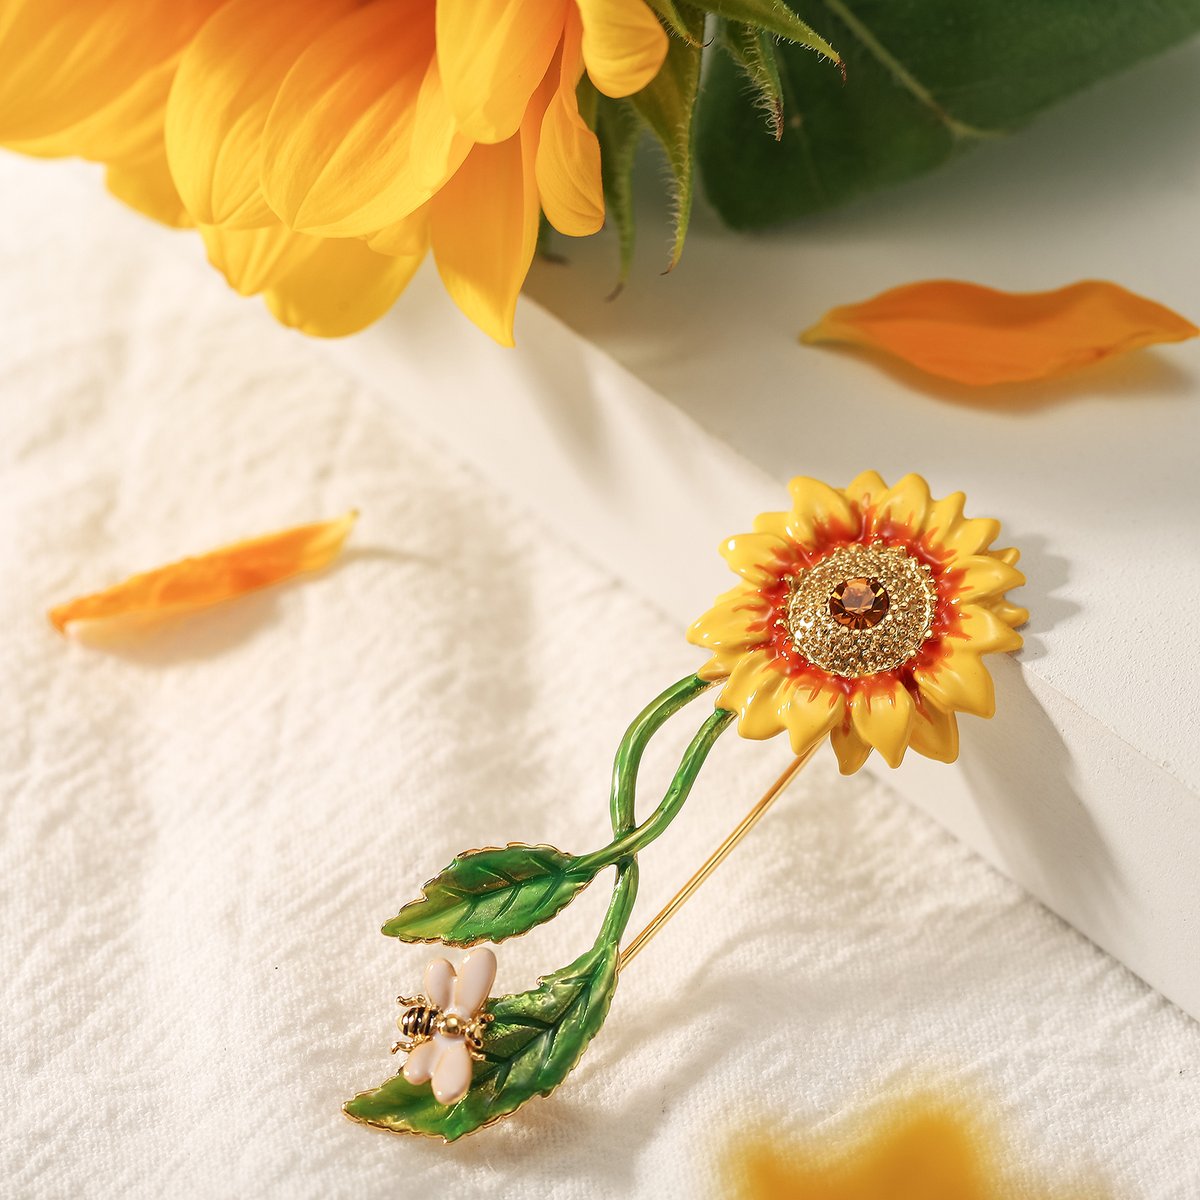 Despite its delicate appearance, a well-crafted Sunflower & Bee Brooch should be sturdy enough for everyday wear. 🌻🐝 

Shop in the link🔗selenichast.com/collections/su…
#selenichast #selenichastjewel #vintagestyles #cottagecore #fashiondaily #jewelrydesign #accessories #aesthetics